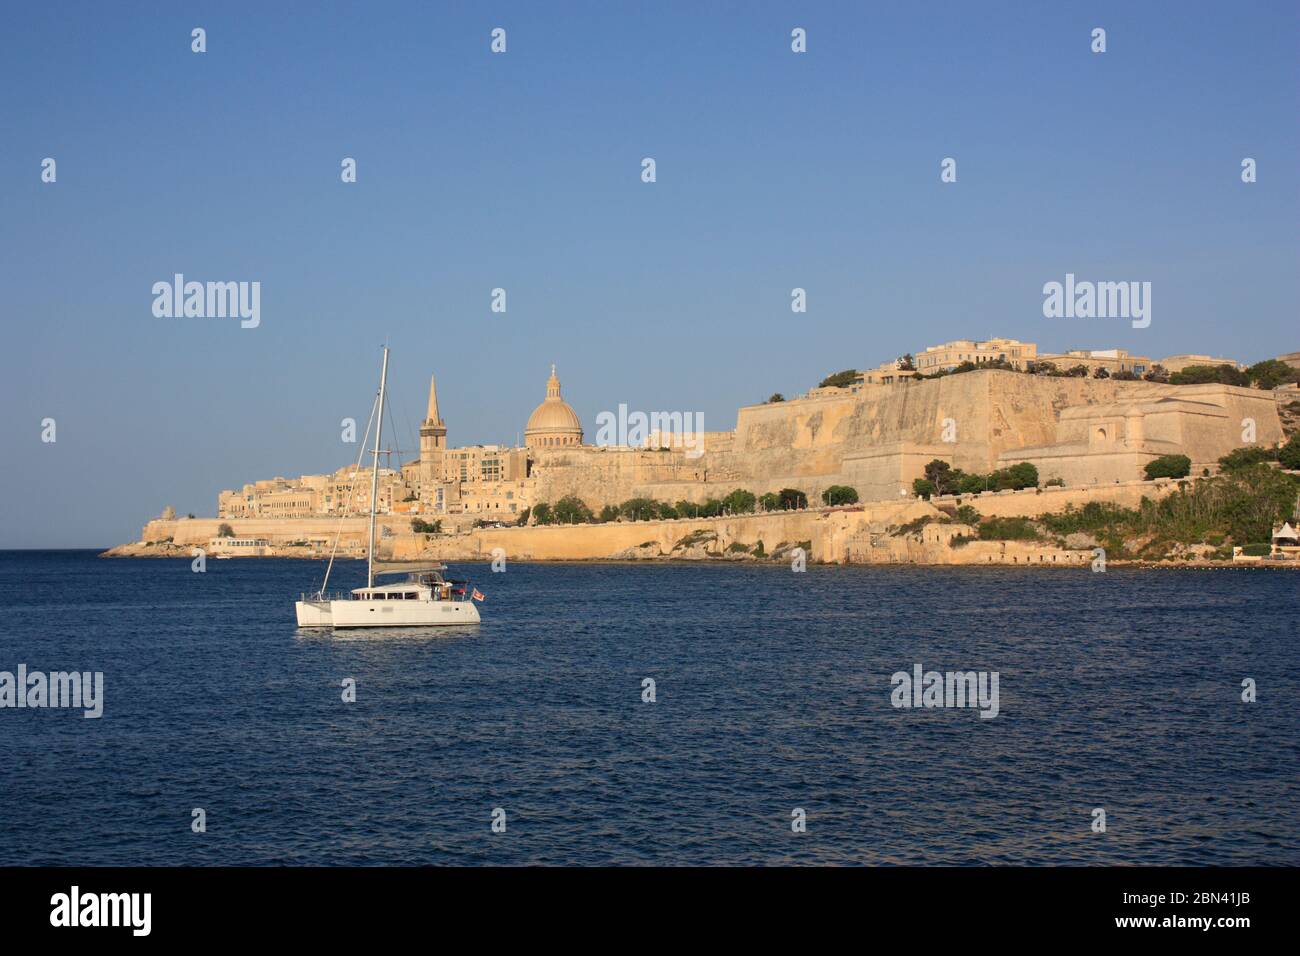 Valletta, Malta, a historic European fortified city. Landscape view from Marsamxett during golden hour. Travel and tourism in the Mediterranean Sea. Stock Photo